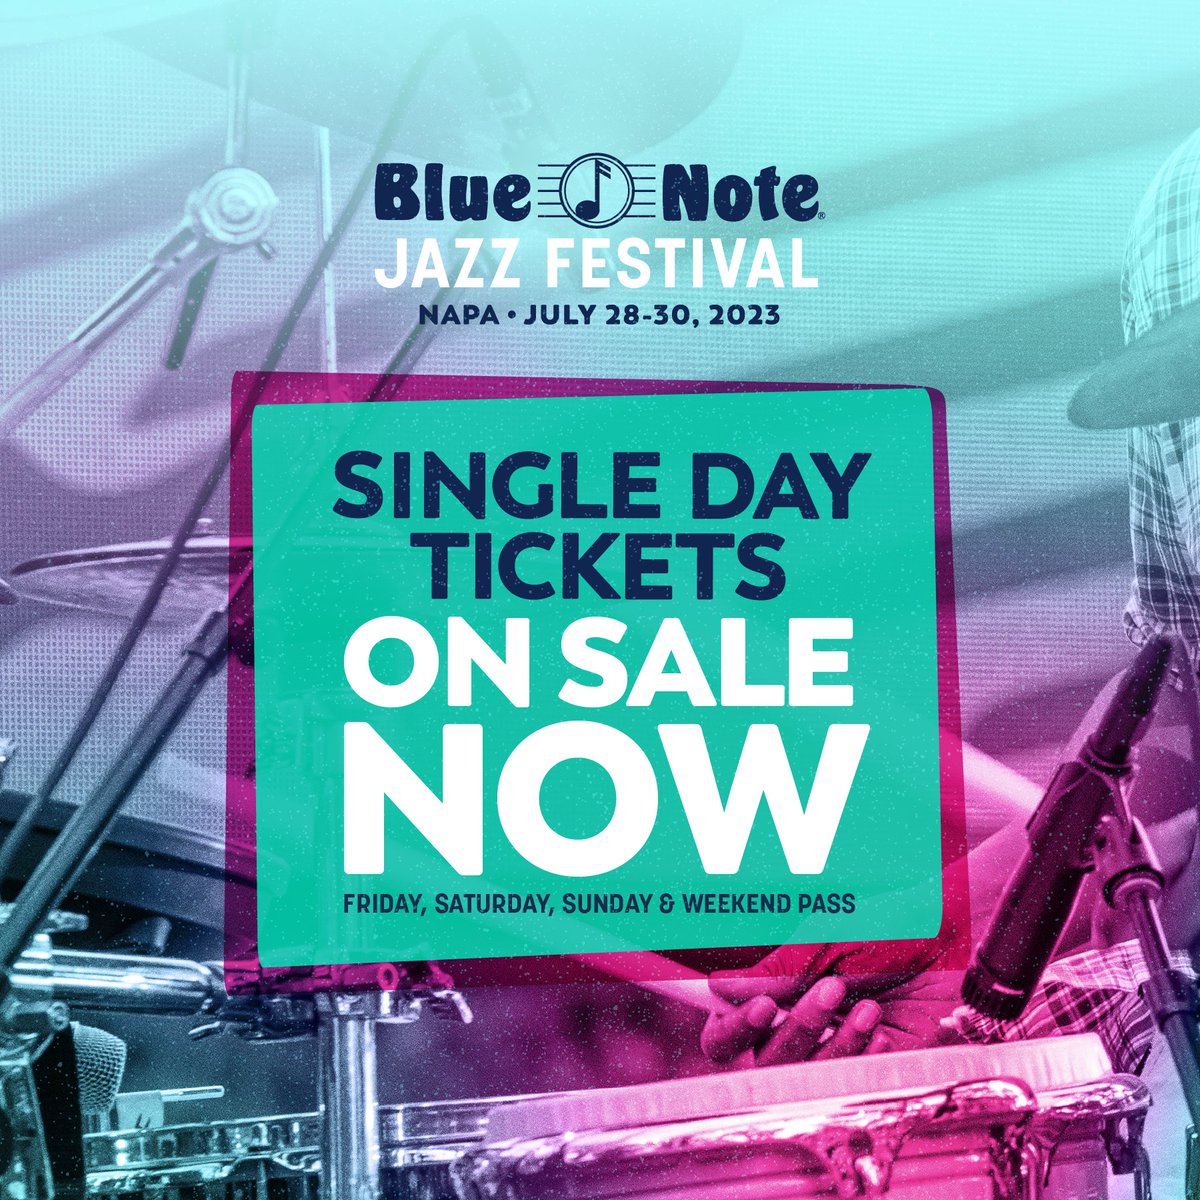 Single day tickets & 2-day 'Weekend Passes' are on sale NOW! Tickets are limited so get them while supplies last. Don’t miss your chance to see @robertglasper, @davechappelle, @therealmaryjblige, @nas, @chancetherapper and many more this summer! bit.ly/3LdwK5z